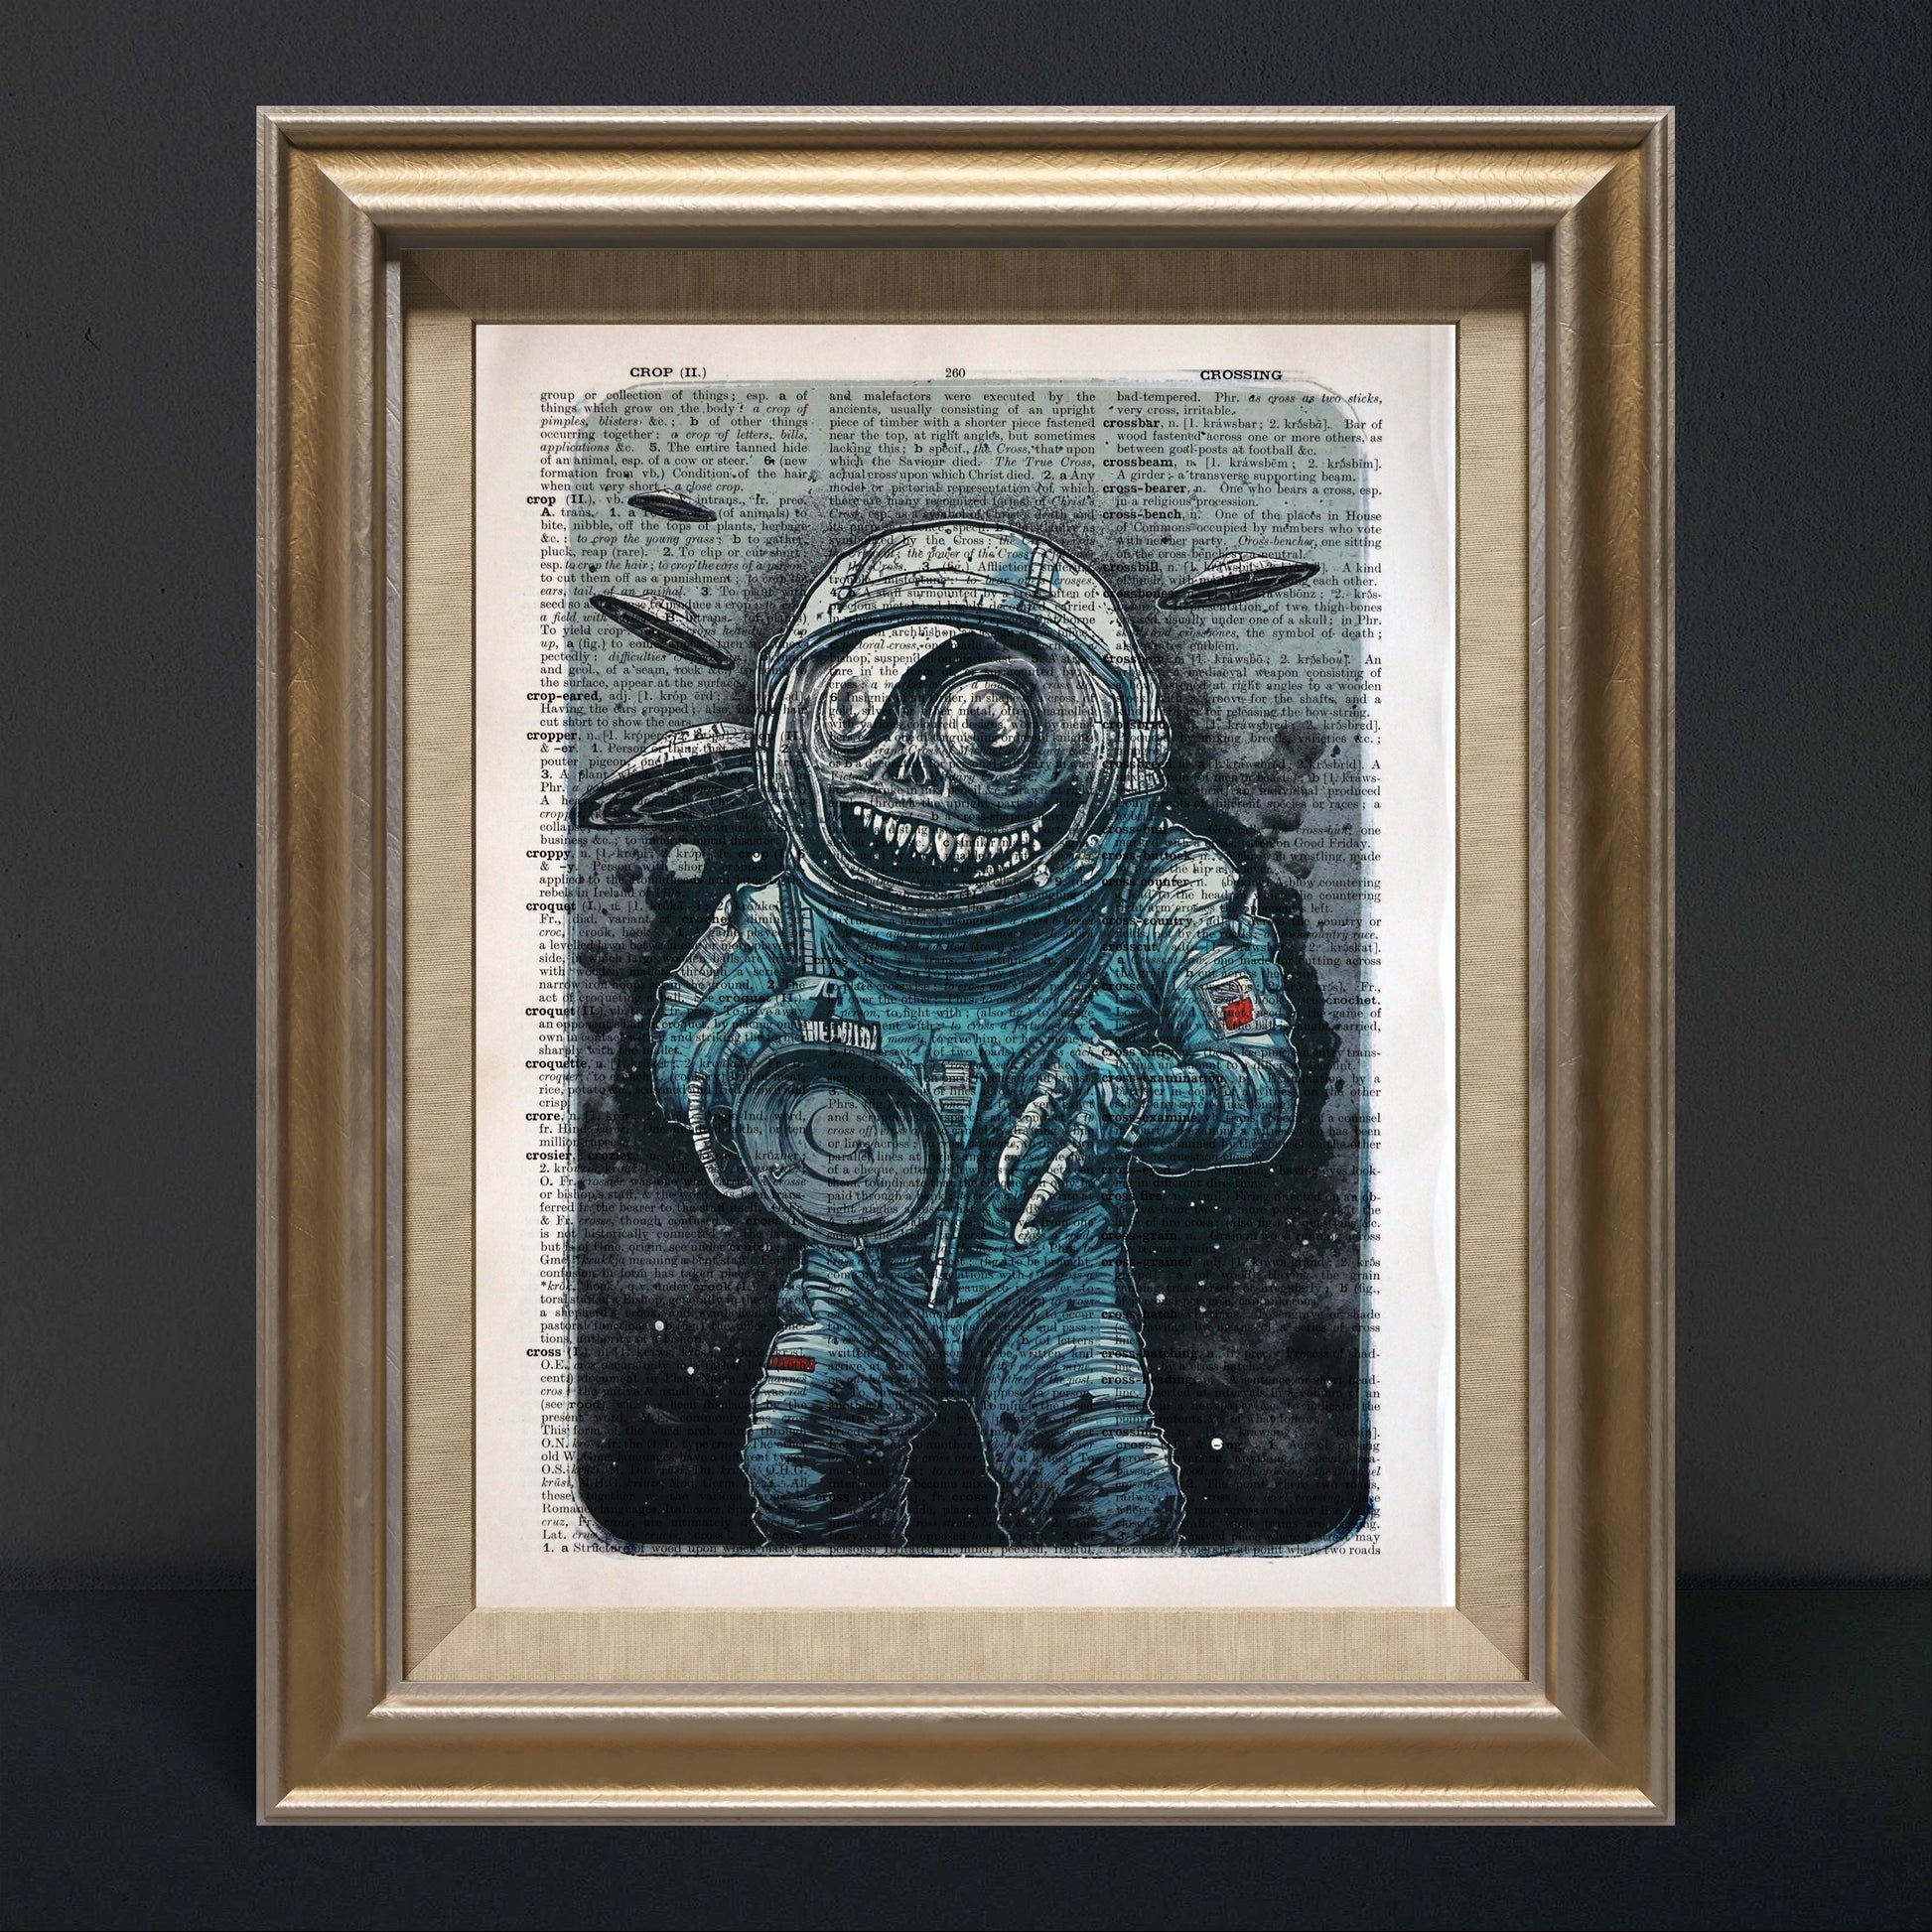 "Cosmic Plague" digital art features an eerie astronaut-like figure and flying saucers on a 1930s dictionary page.